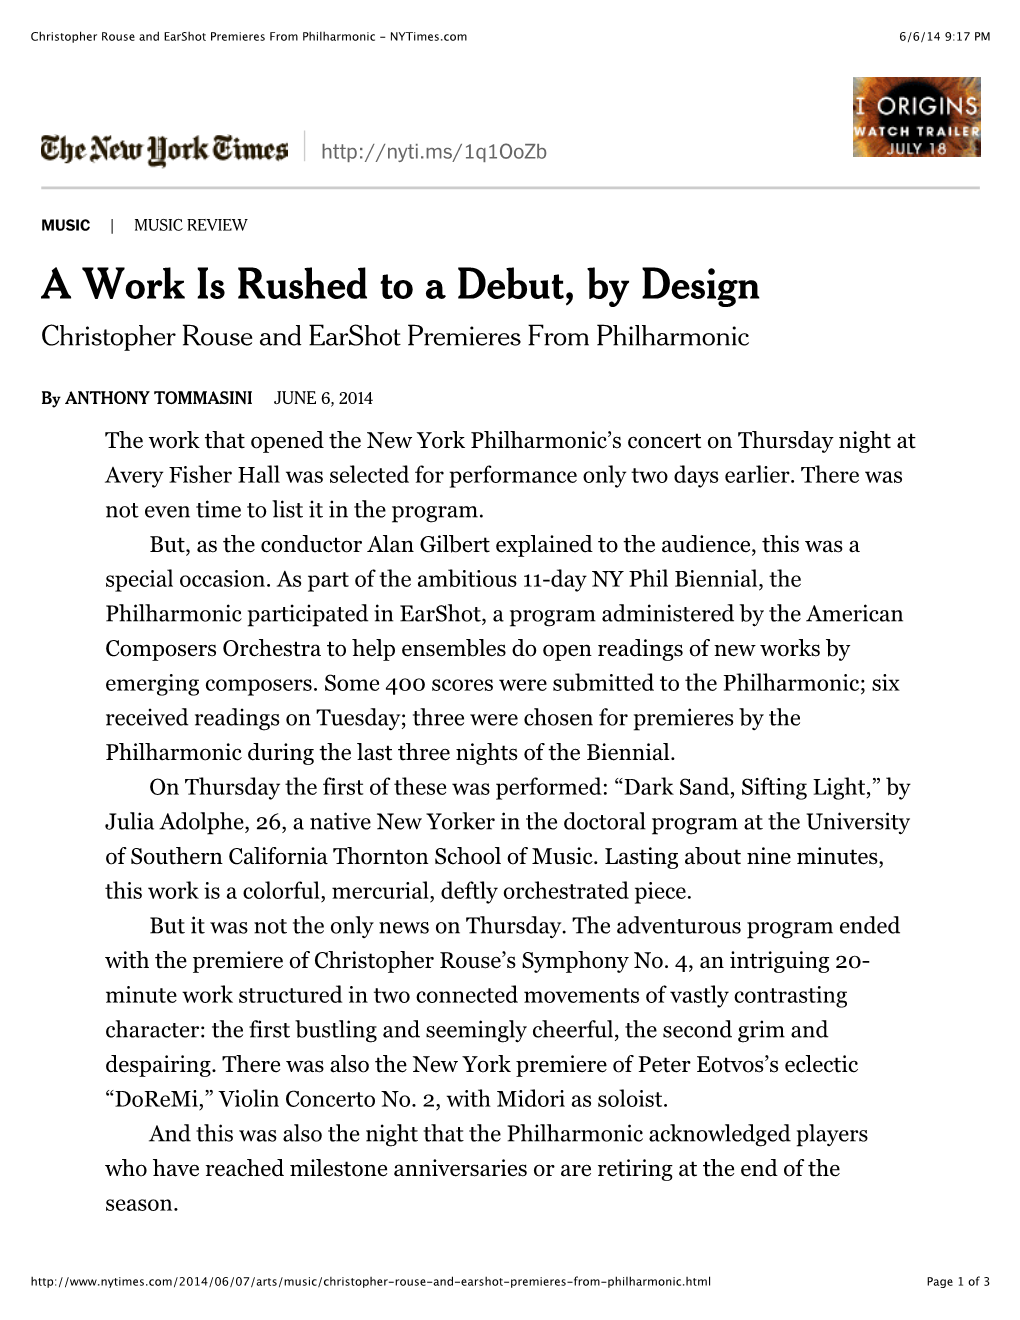 Christopher Rouse and Earshot Premieres from Philharmonic - Nytimes.Com 6/6/14 9:17 PM